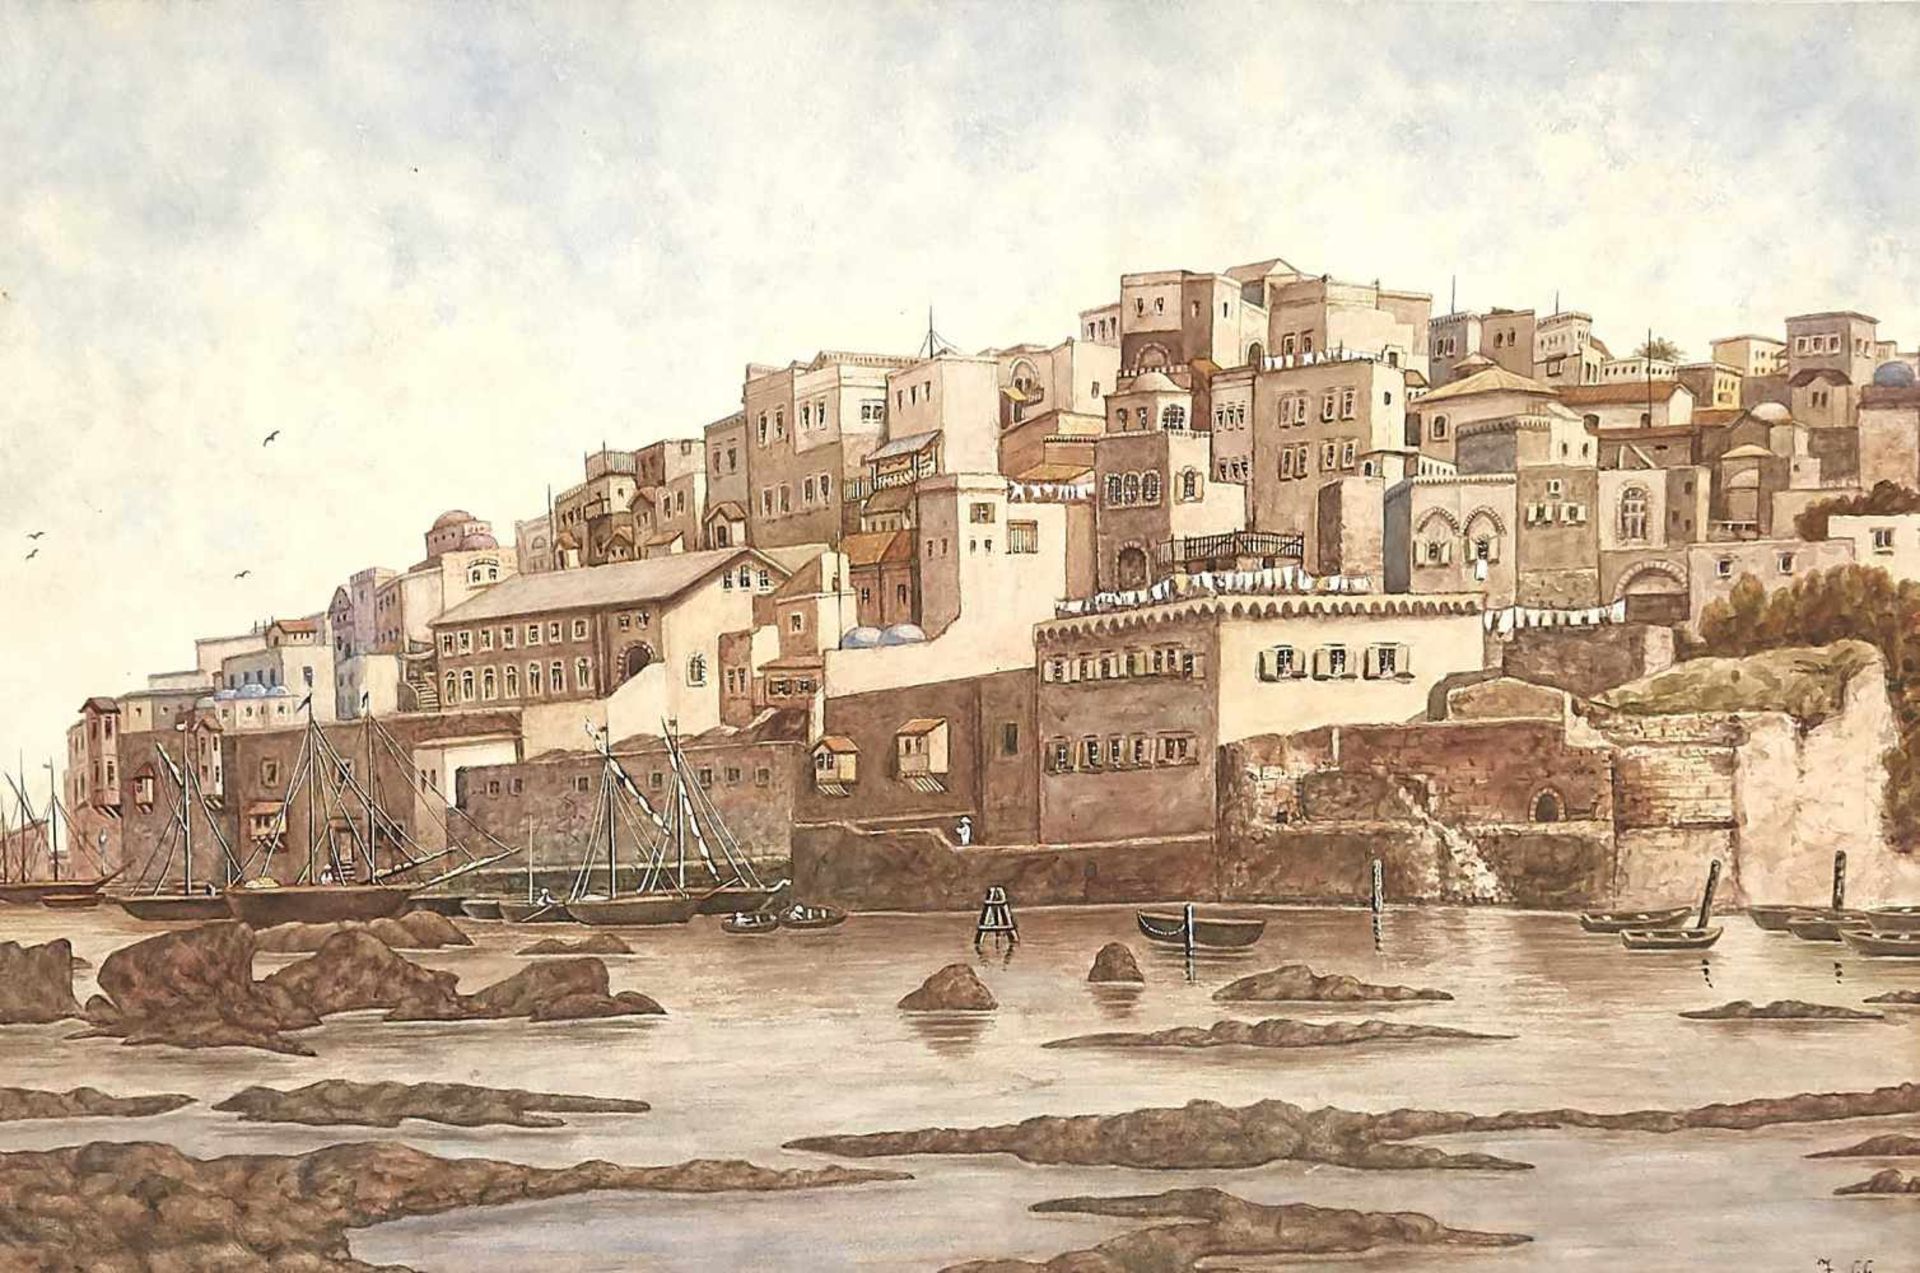 Anonymous painter 1st H. 20th century, the Old Port of Jaffa (Tel-Aviv) in Israel,